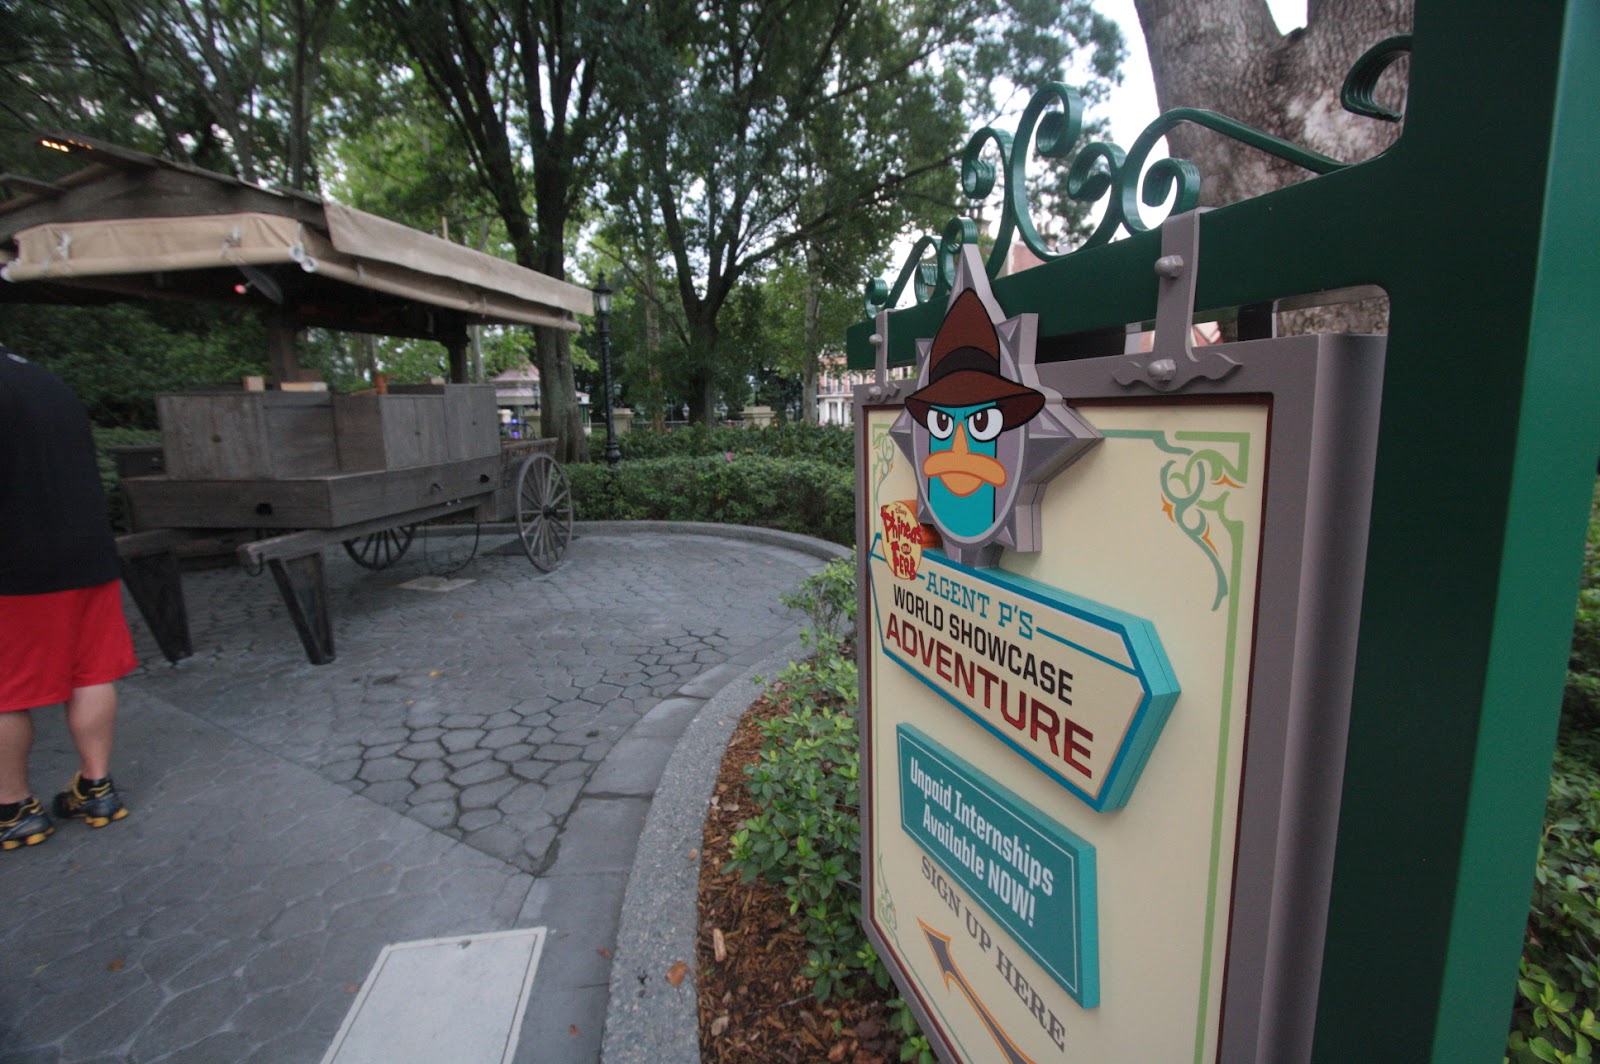 Agent P's World Showcase Adventure Sign Up Location in Epcot